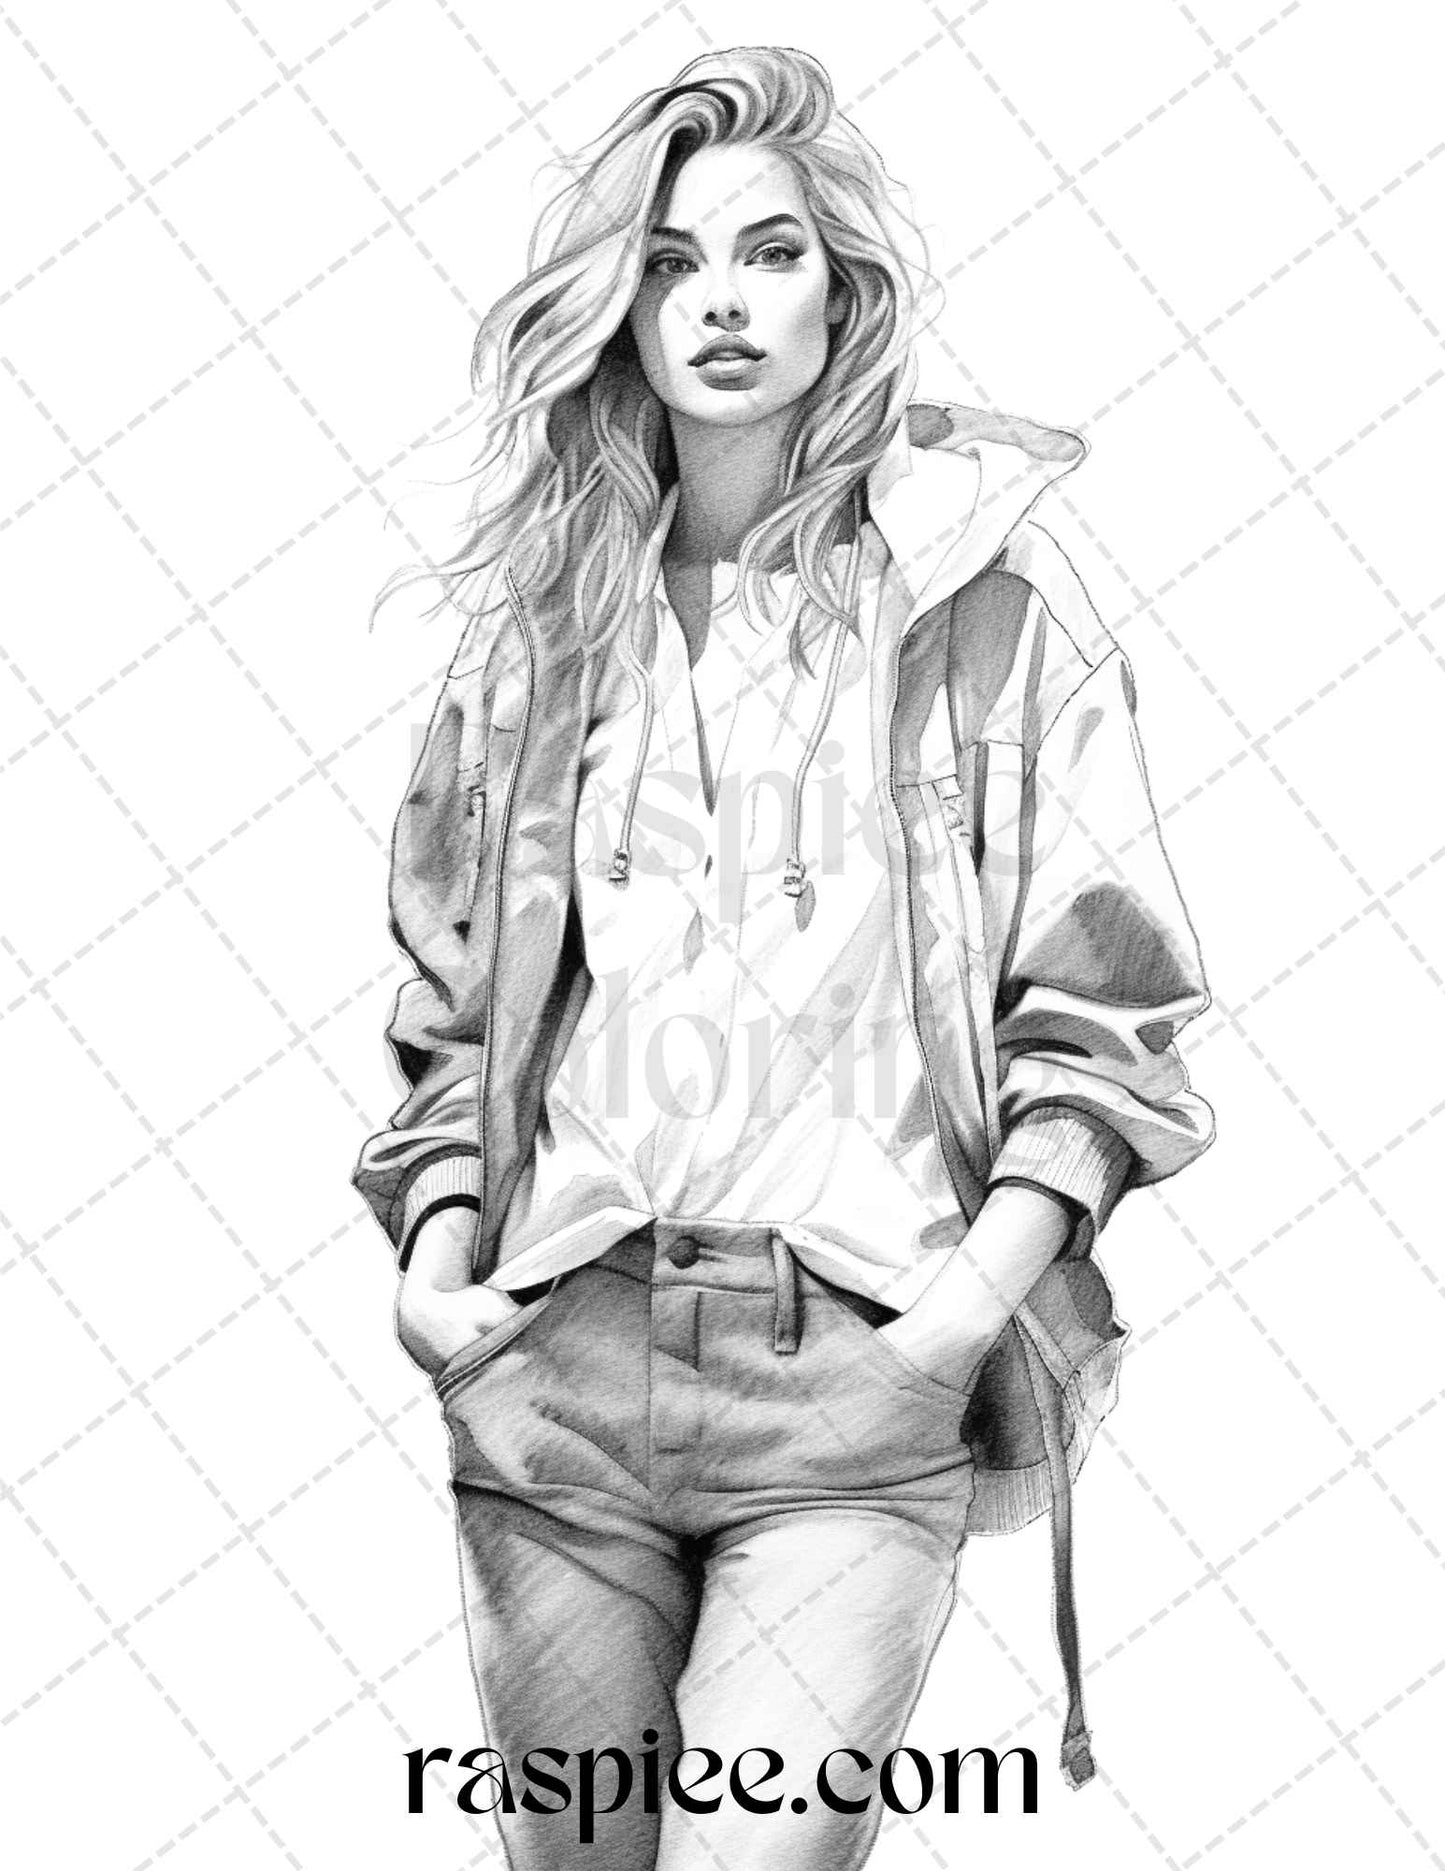 50 Streetwear Fashion Grayscale Coloring Pages Printable for Adults, PDF File Instant Download - raspiee